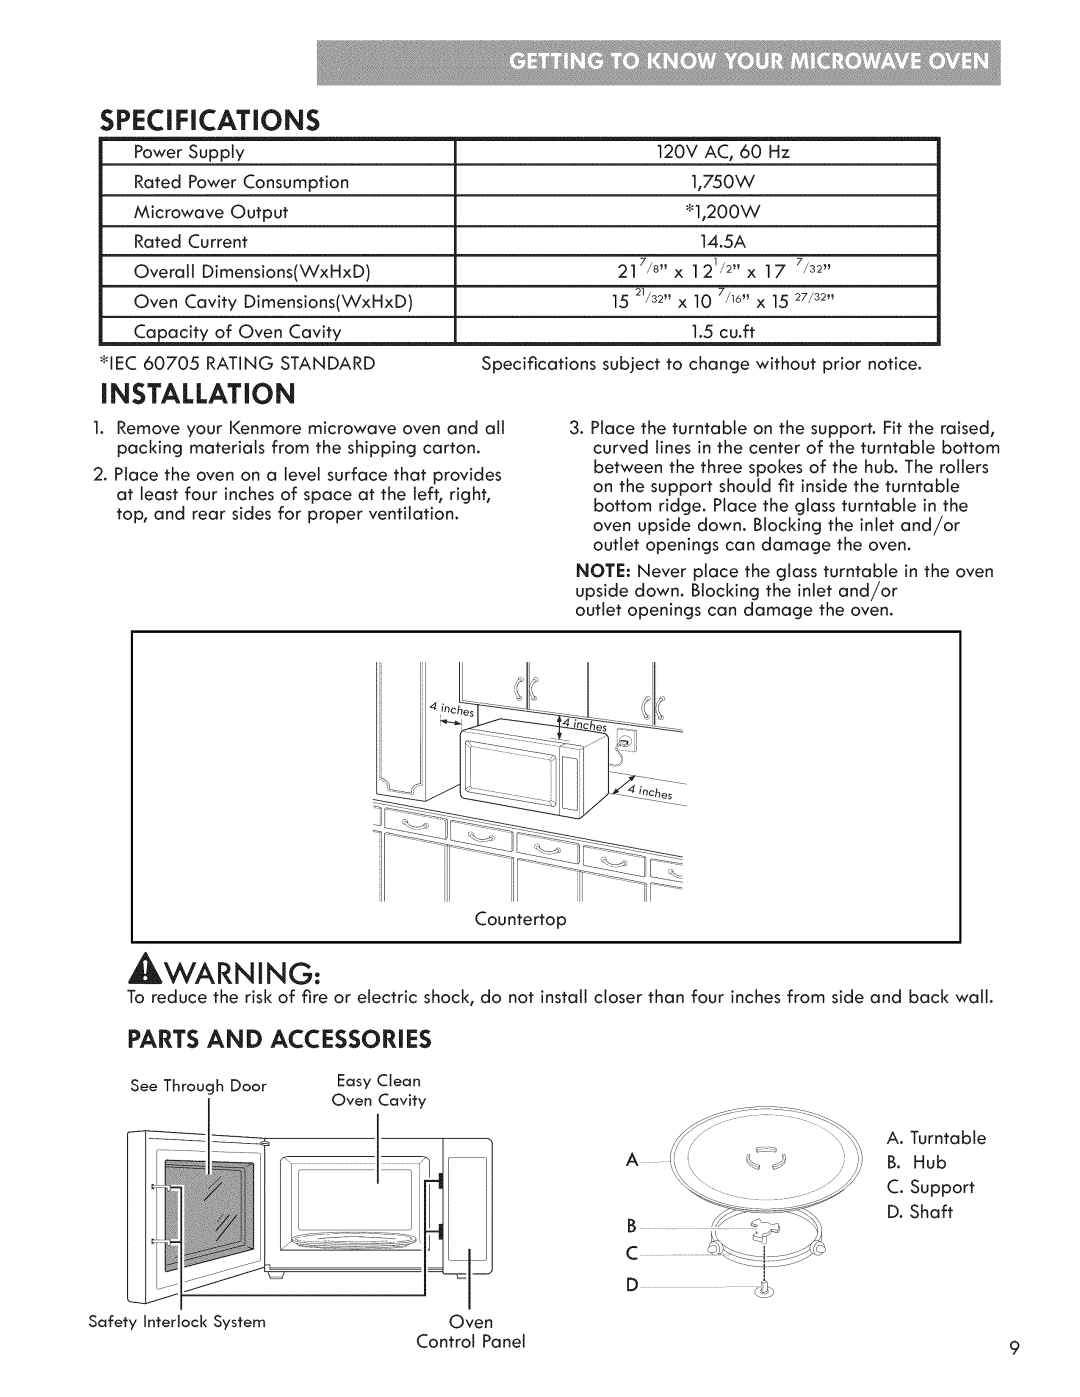 Kenmore 721.7915 manual SPECiFiCATiONS, Installation, Parts And Accessories 